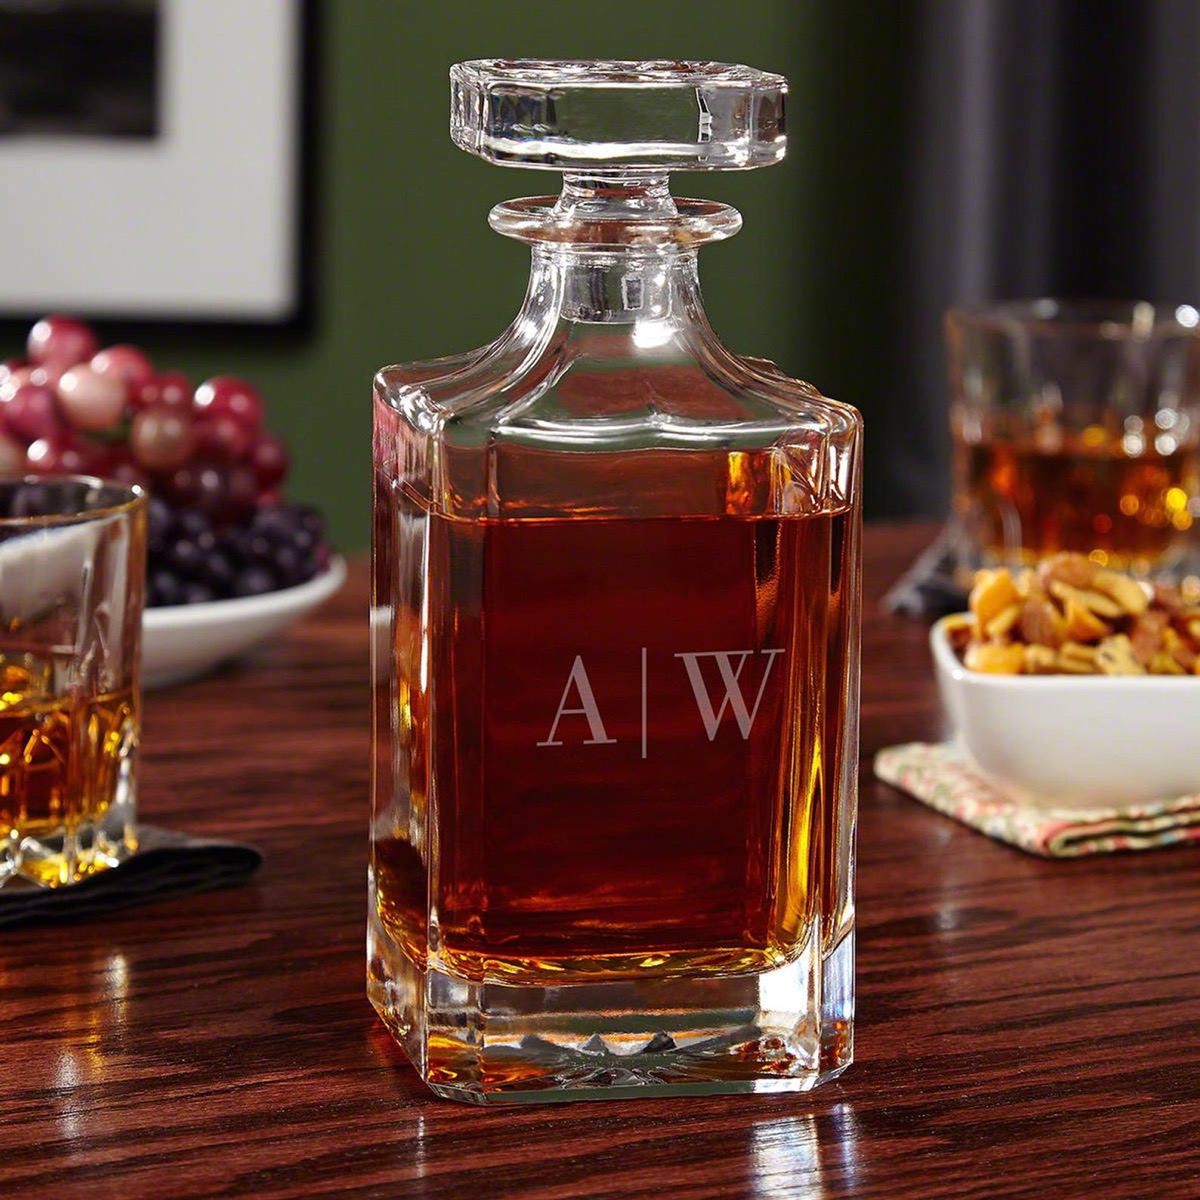 Glass decanter with initials "AW"